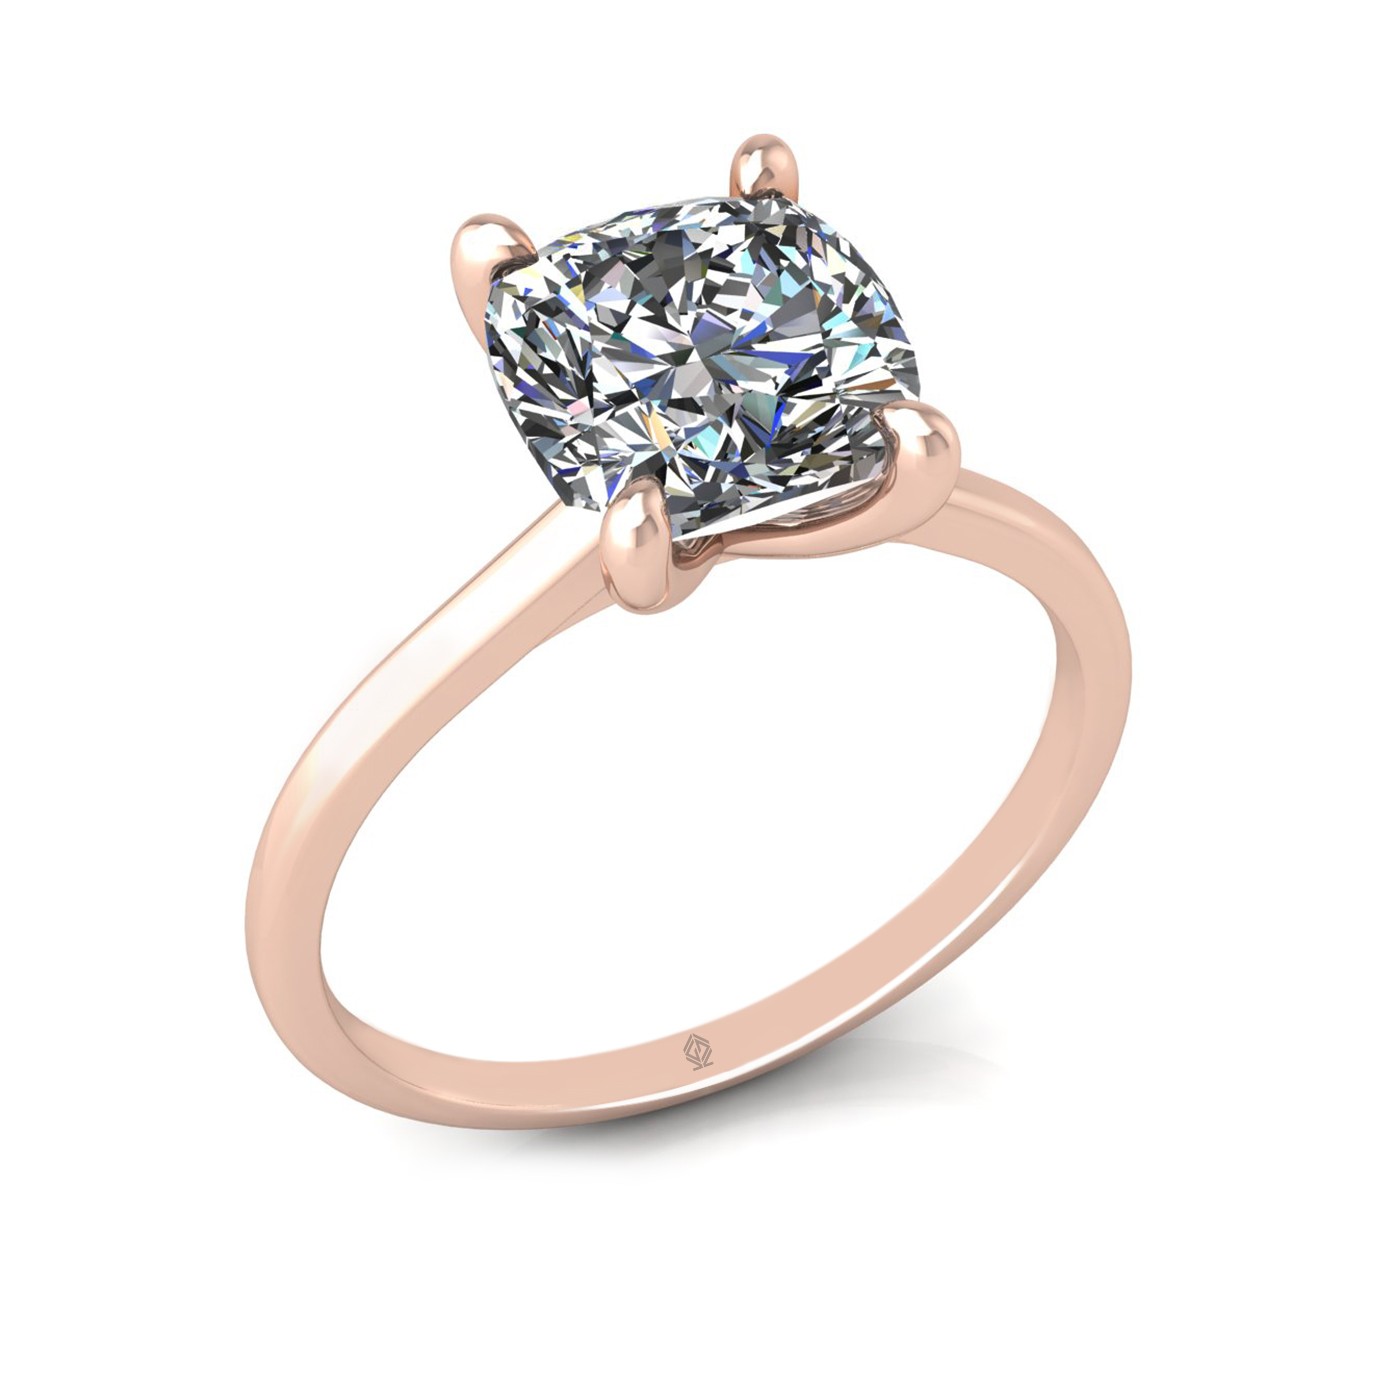 18k rose gold 2.5ct 4 prongs solitaire cushion cut diamond engagement ring with whisper thin band